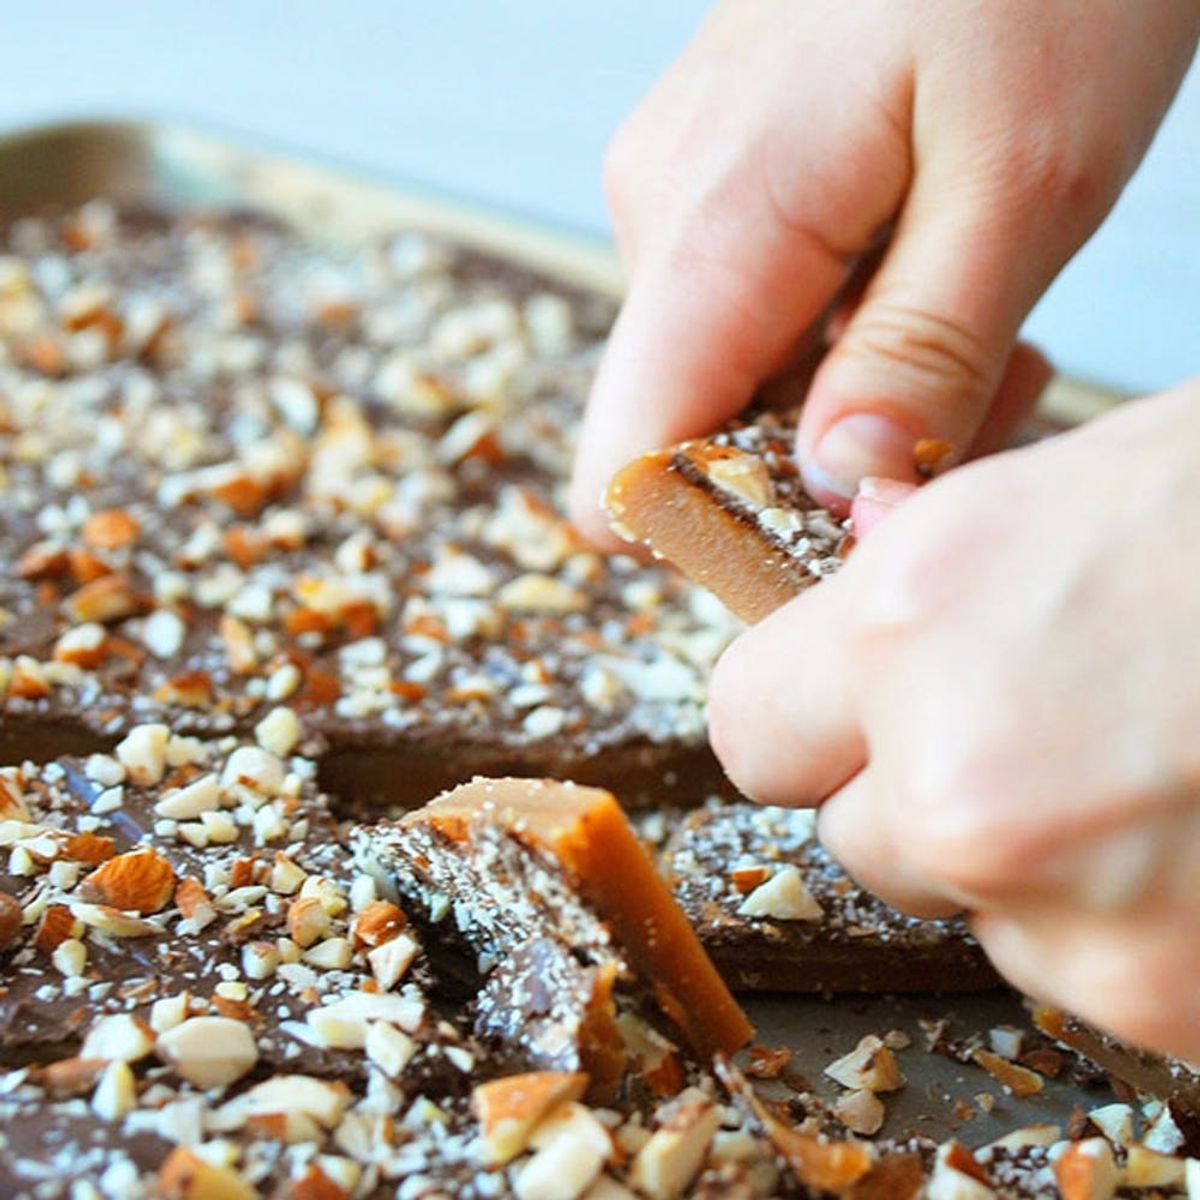 Make This English Toffee Recipe That Will Make Guests Weak in the Knees